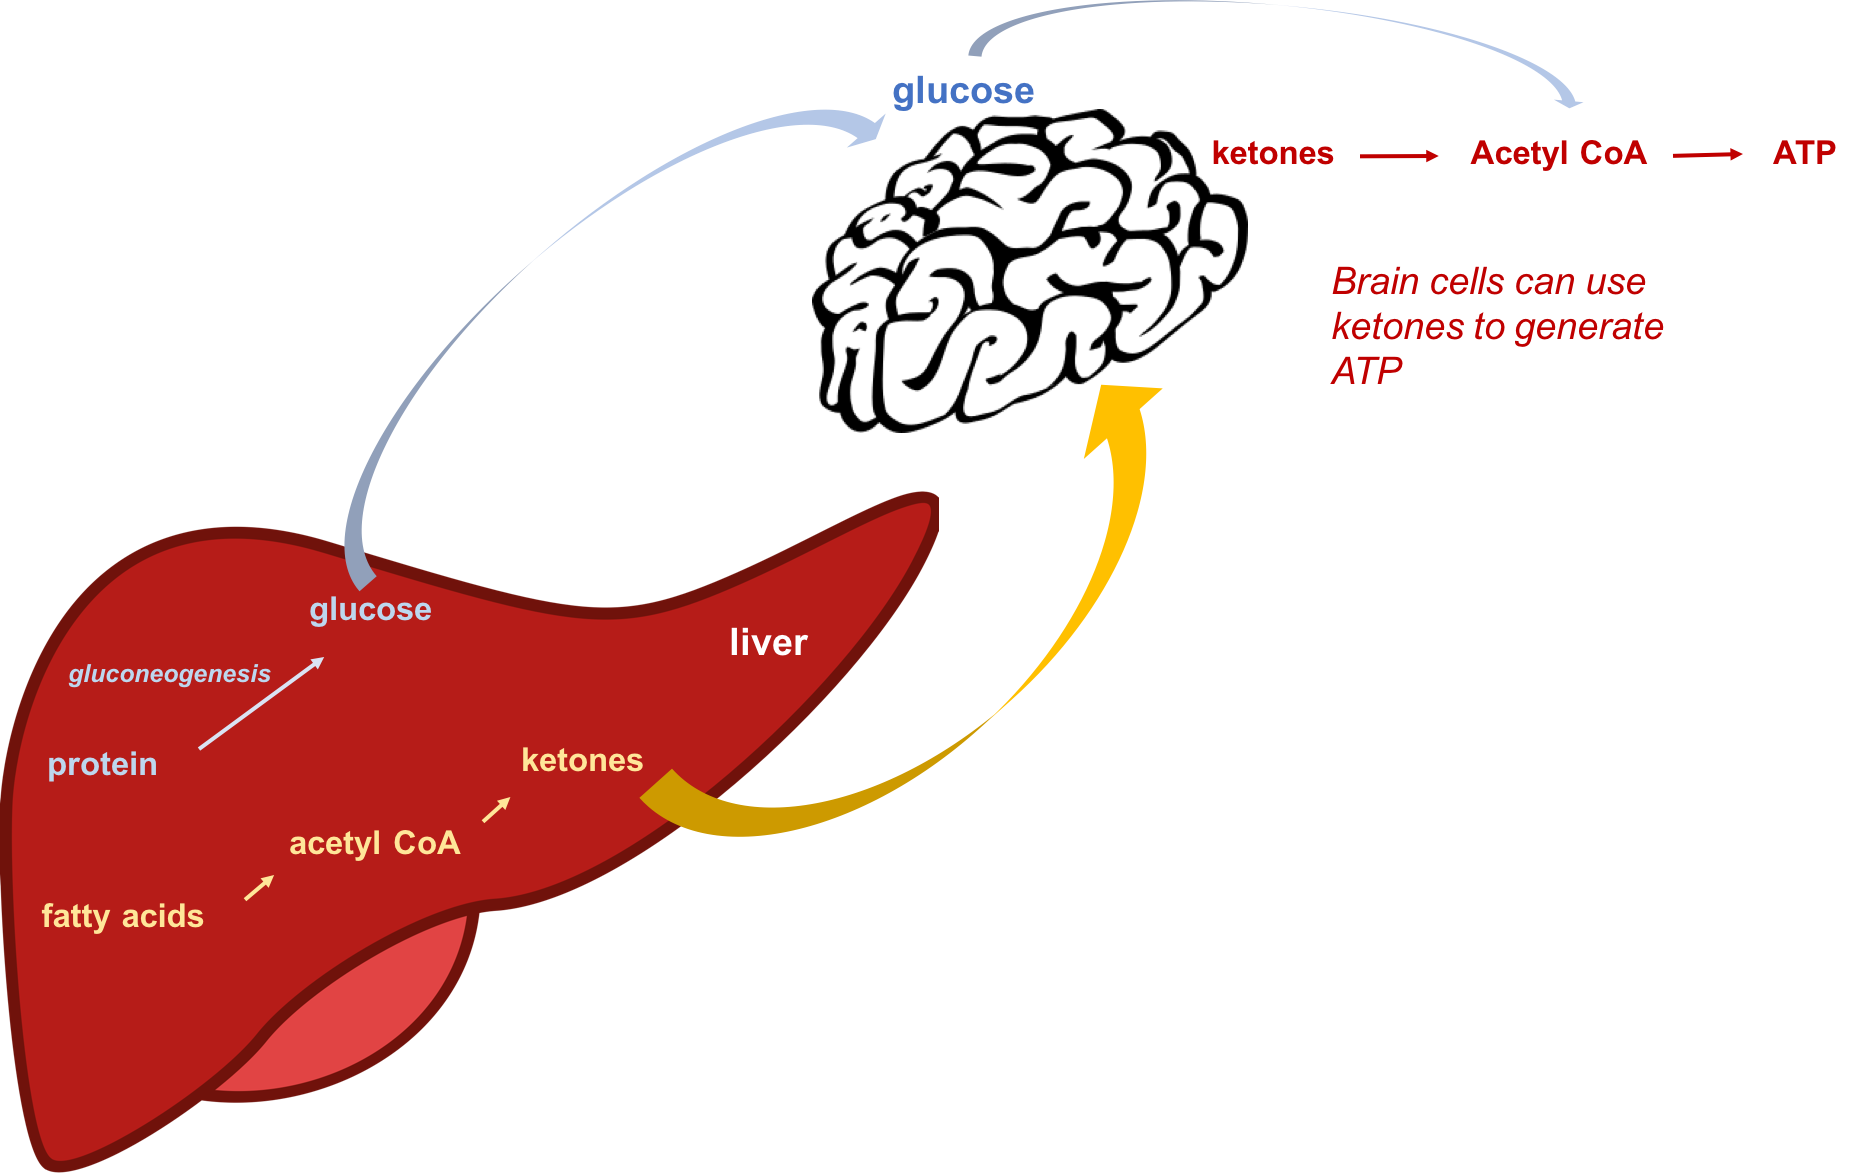 Schematic showing that during starvation or when consuming a low-carbohydrate diet, protein (amino acids) can be used to make glucose by gluconeogenesis, and fats can be used to make ketones in the liver. The brain can adapt to using ketones as an energy source in order to conserve protein and prevent muscle wasting.